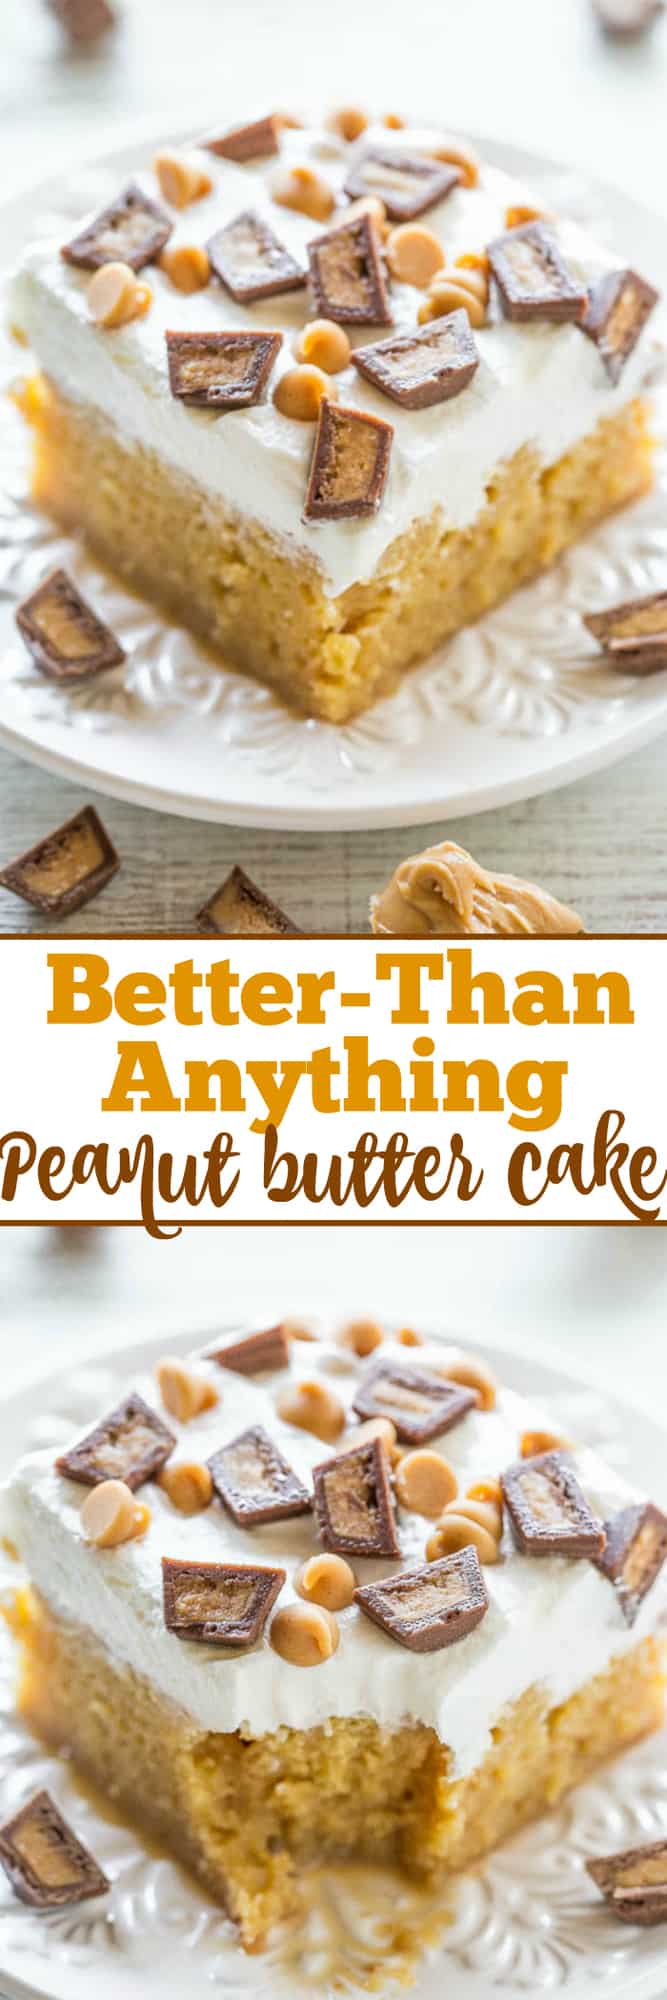 Better-Than-Anything Peanut Butter Cake - A peanut butter lovers dream: PB, PB chips, and PB cups!! An easy, no-mixer poke cake that's drenched with caramel to keep it super moist! Lives up to it's name and tastes AMAZING!!